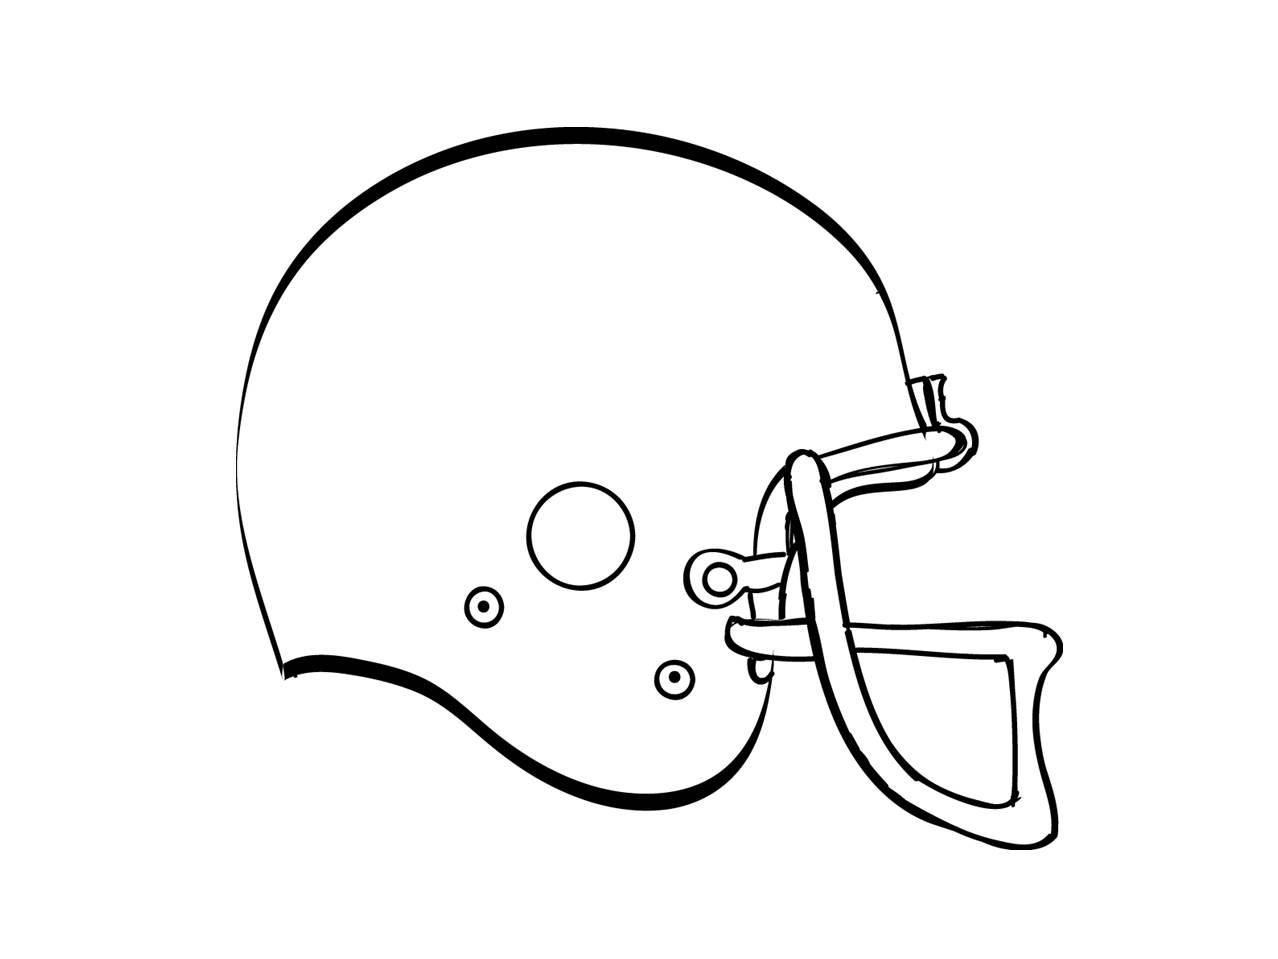 Football helmet drawing front view free clipart 2 - Cliparting.com